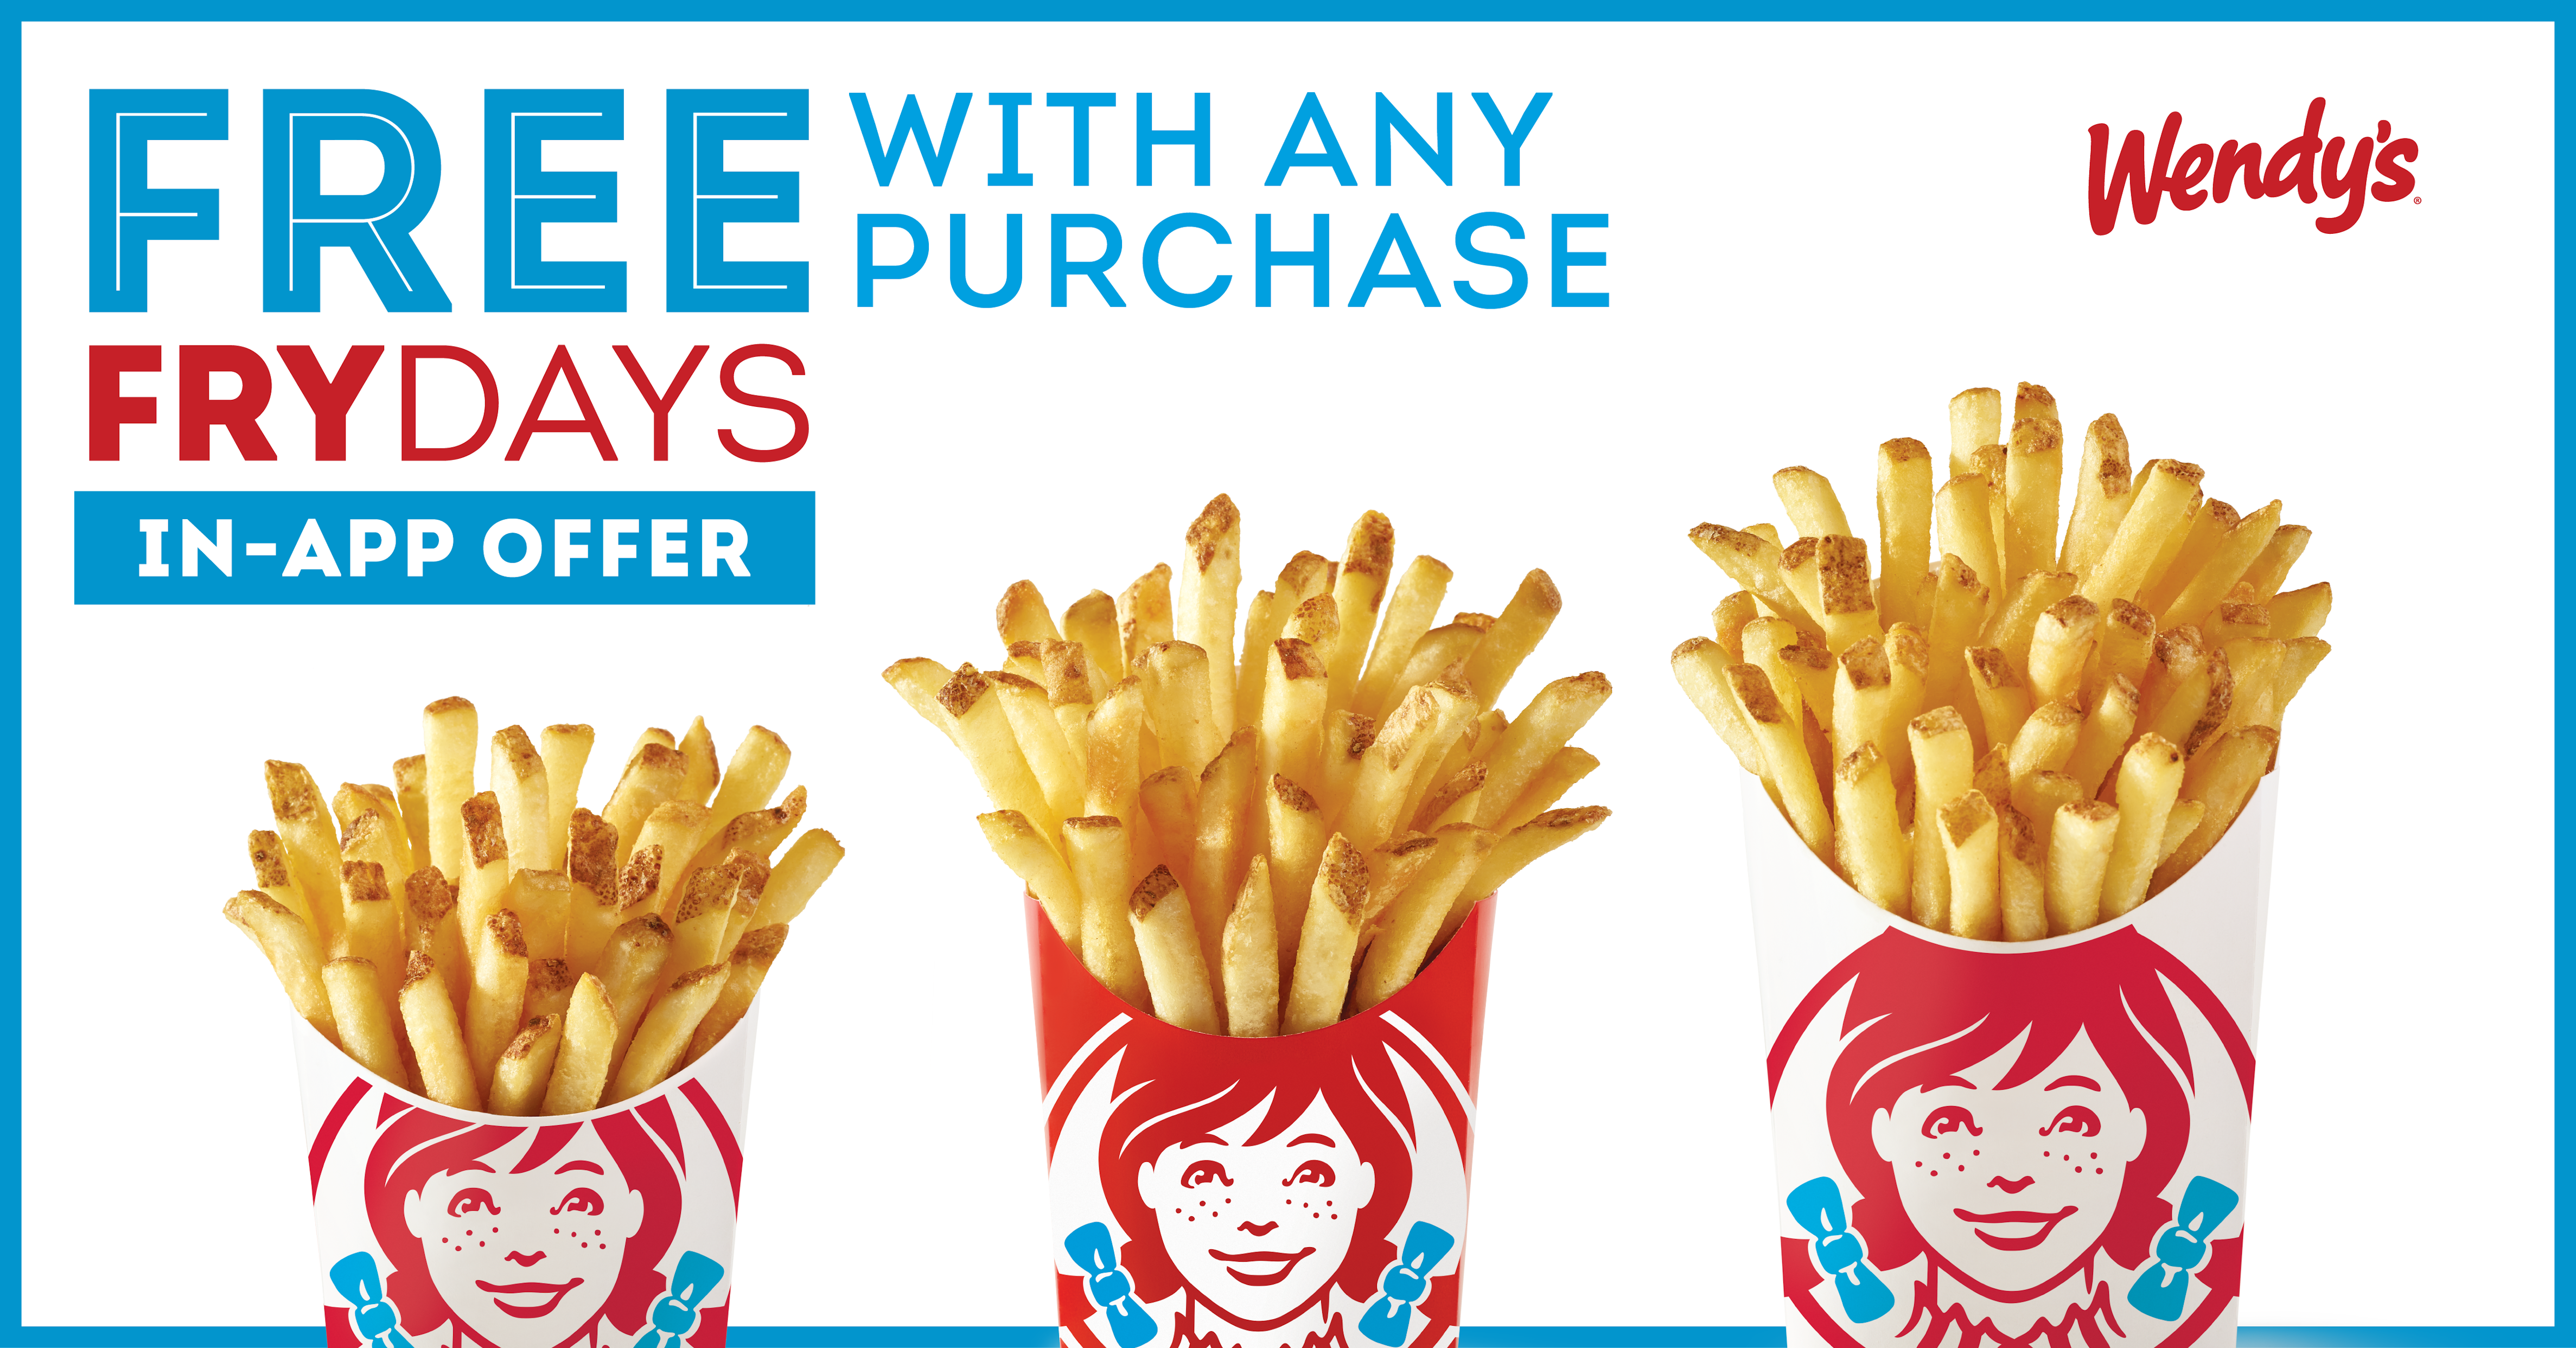 wendy's is giving away free french fries every friday for the rest of the year